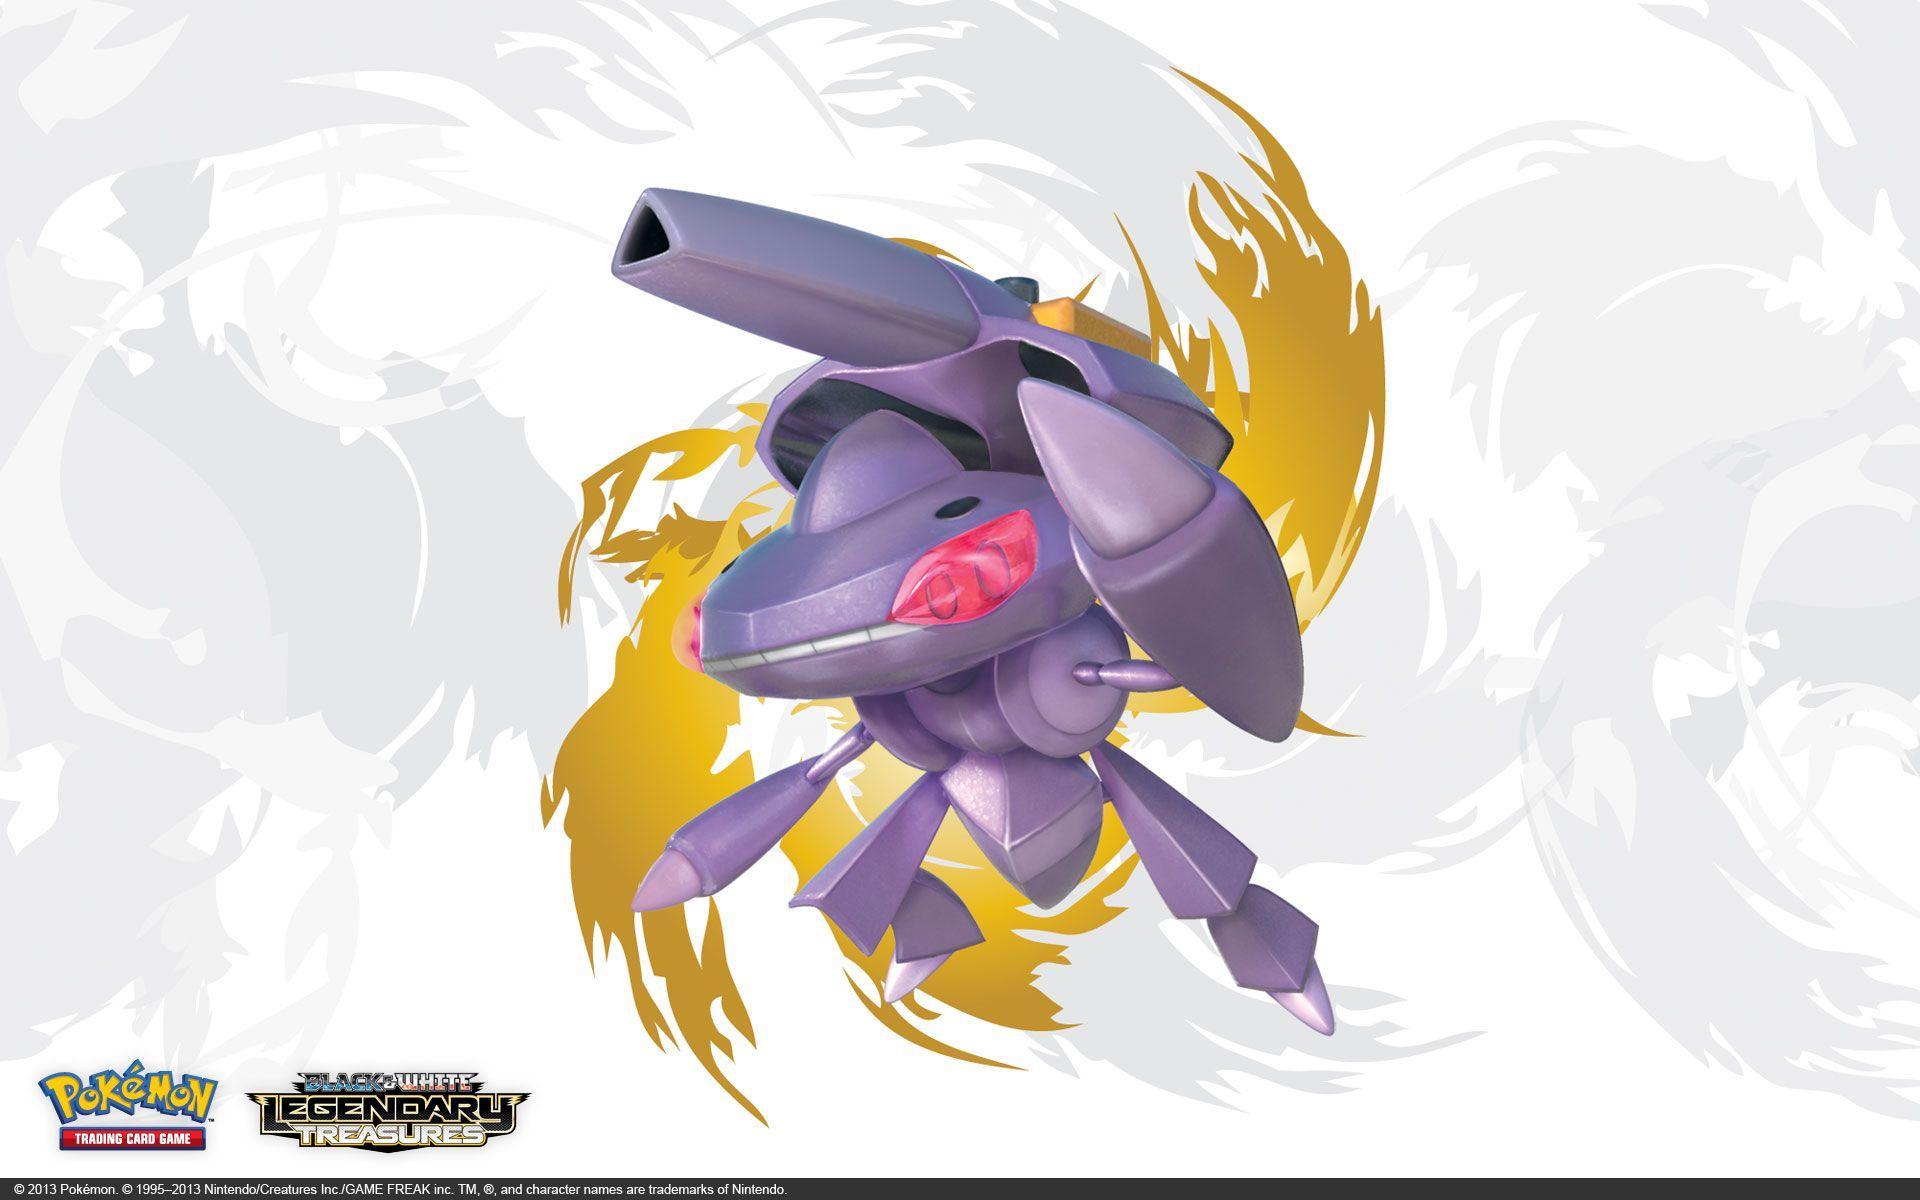 Genesect Wallpaper, Top HD Genesect Image, #JNW High Resolution